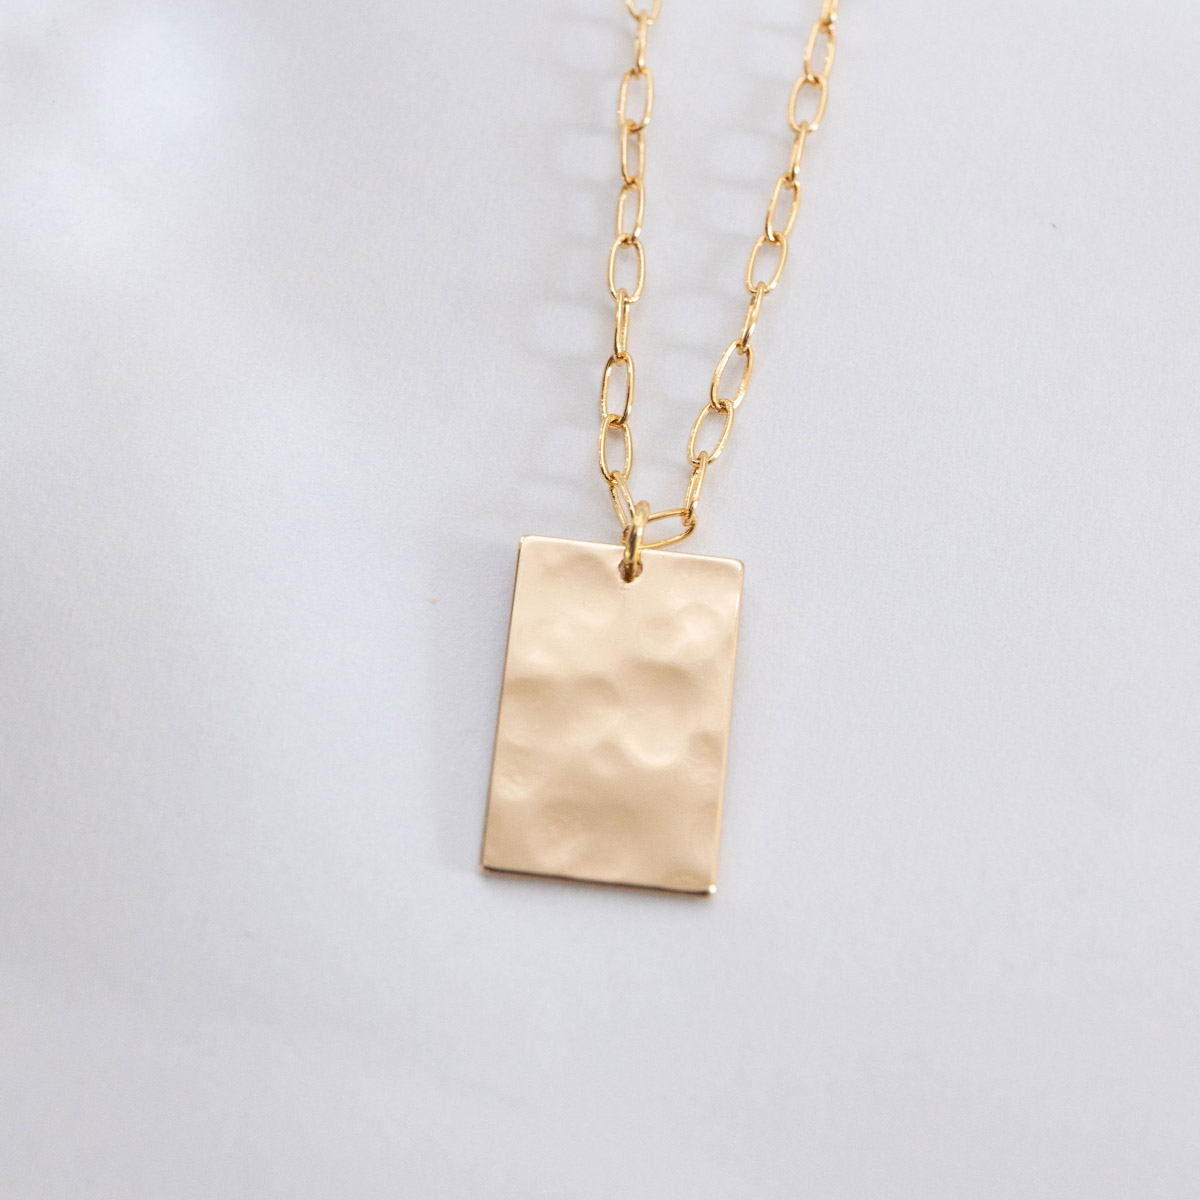 Zenith Necklace, a gold tone hammered ractangle charm on a dainty gold paperclip style chain.